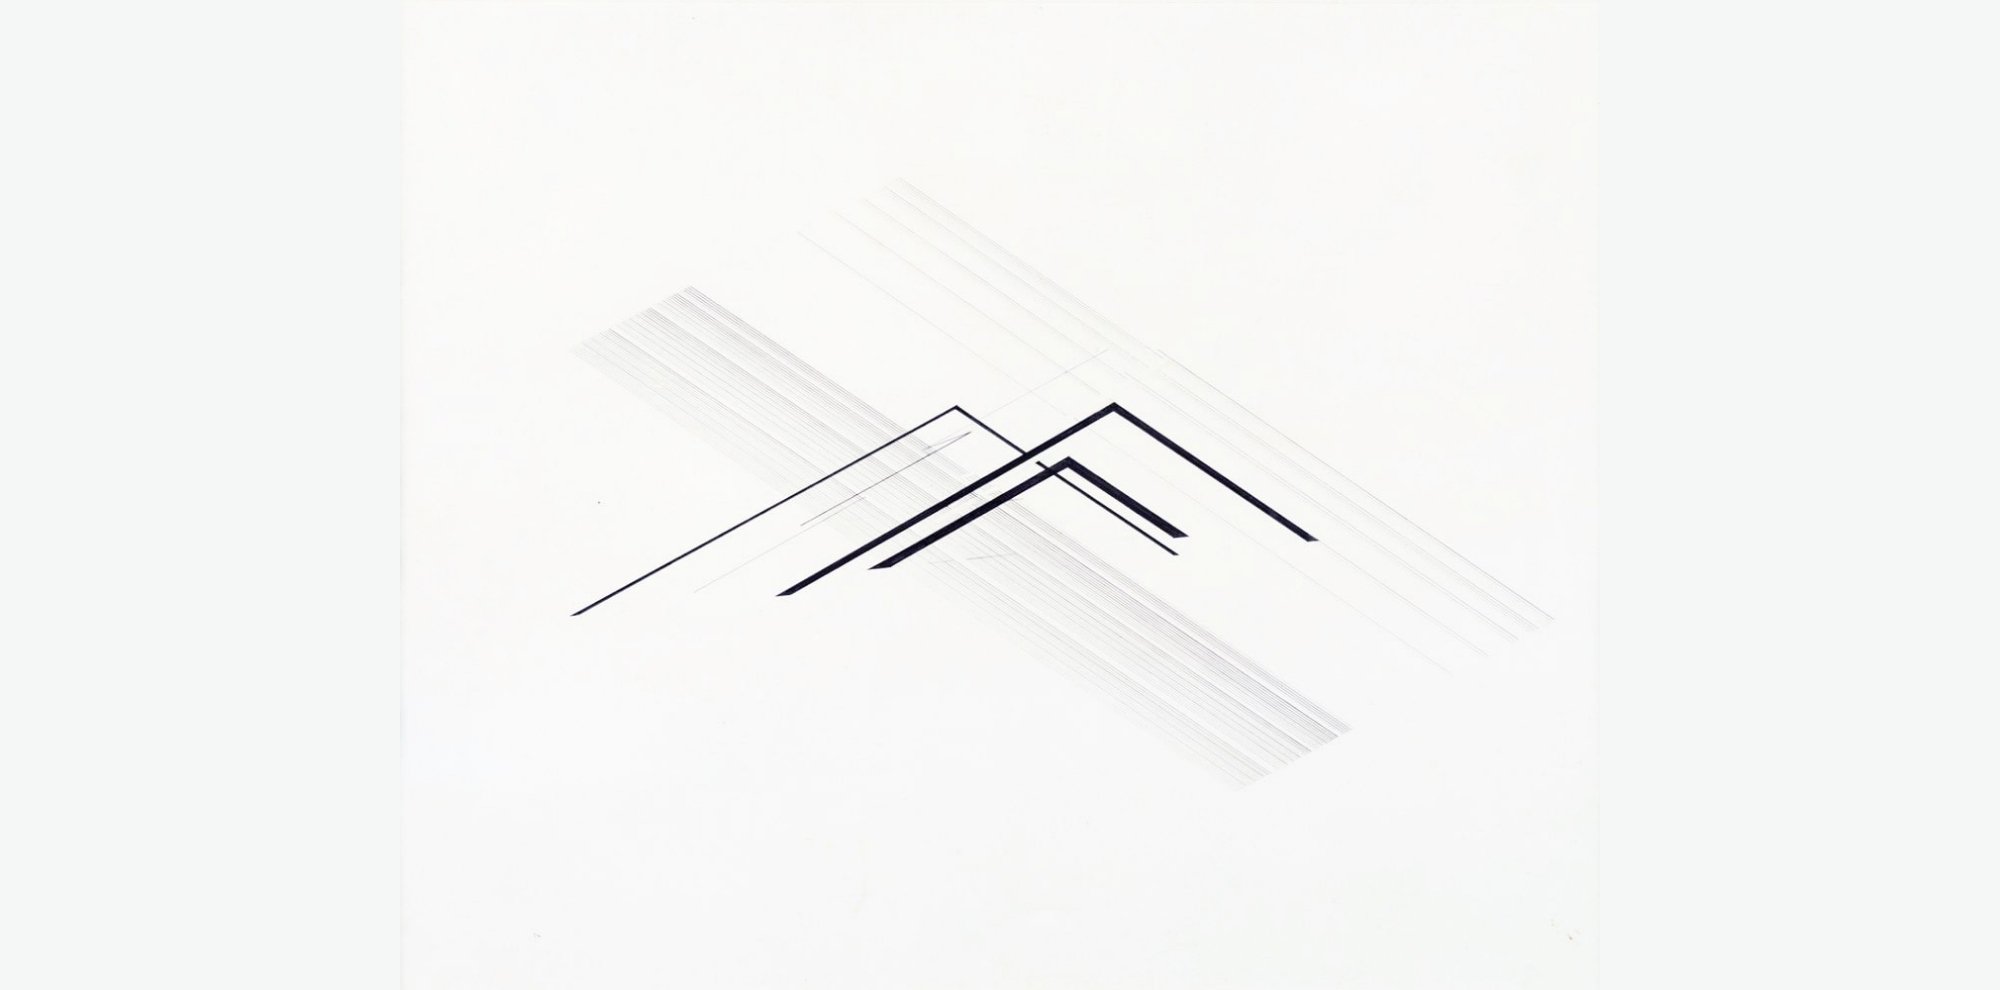 Slanting lines of varying weight/ thickness overlapped by three bold L-shapes on white paper.